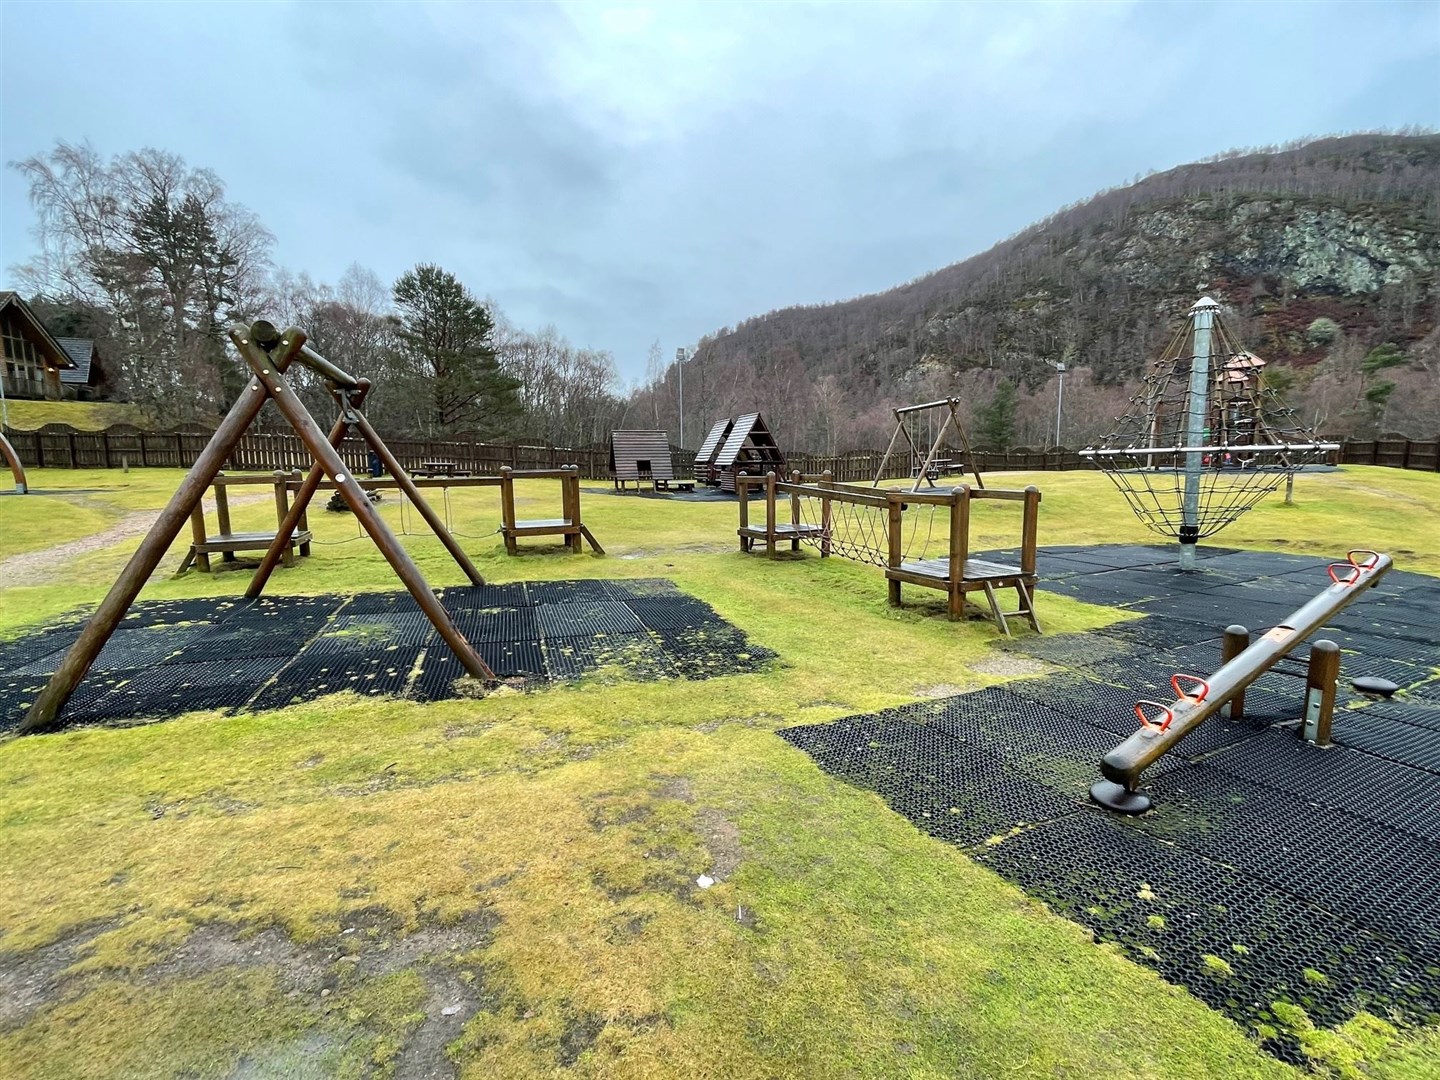 The play park at the Macdonald Aviemore Resort forms part of the development site.